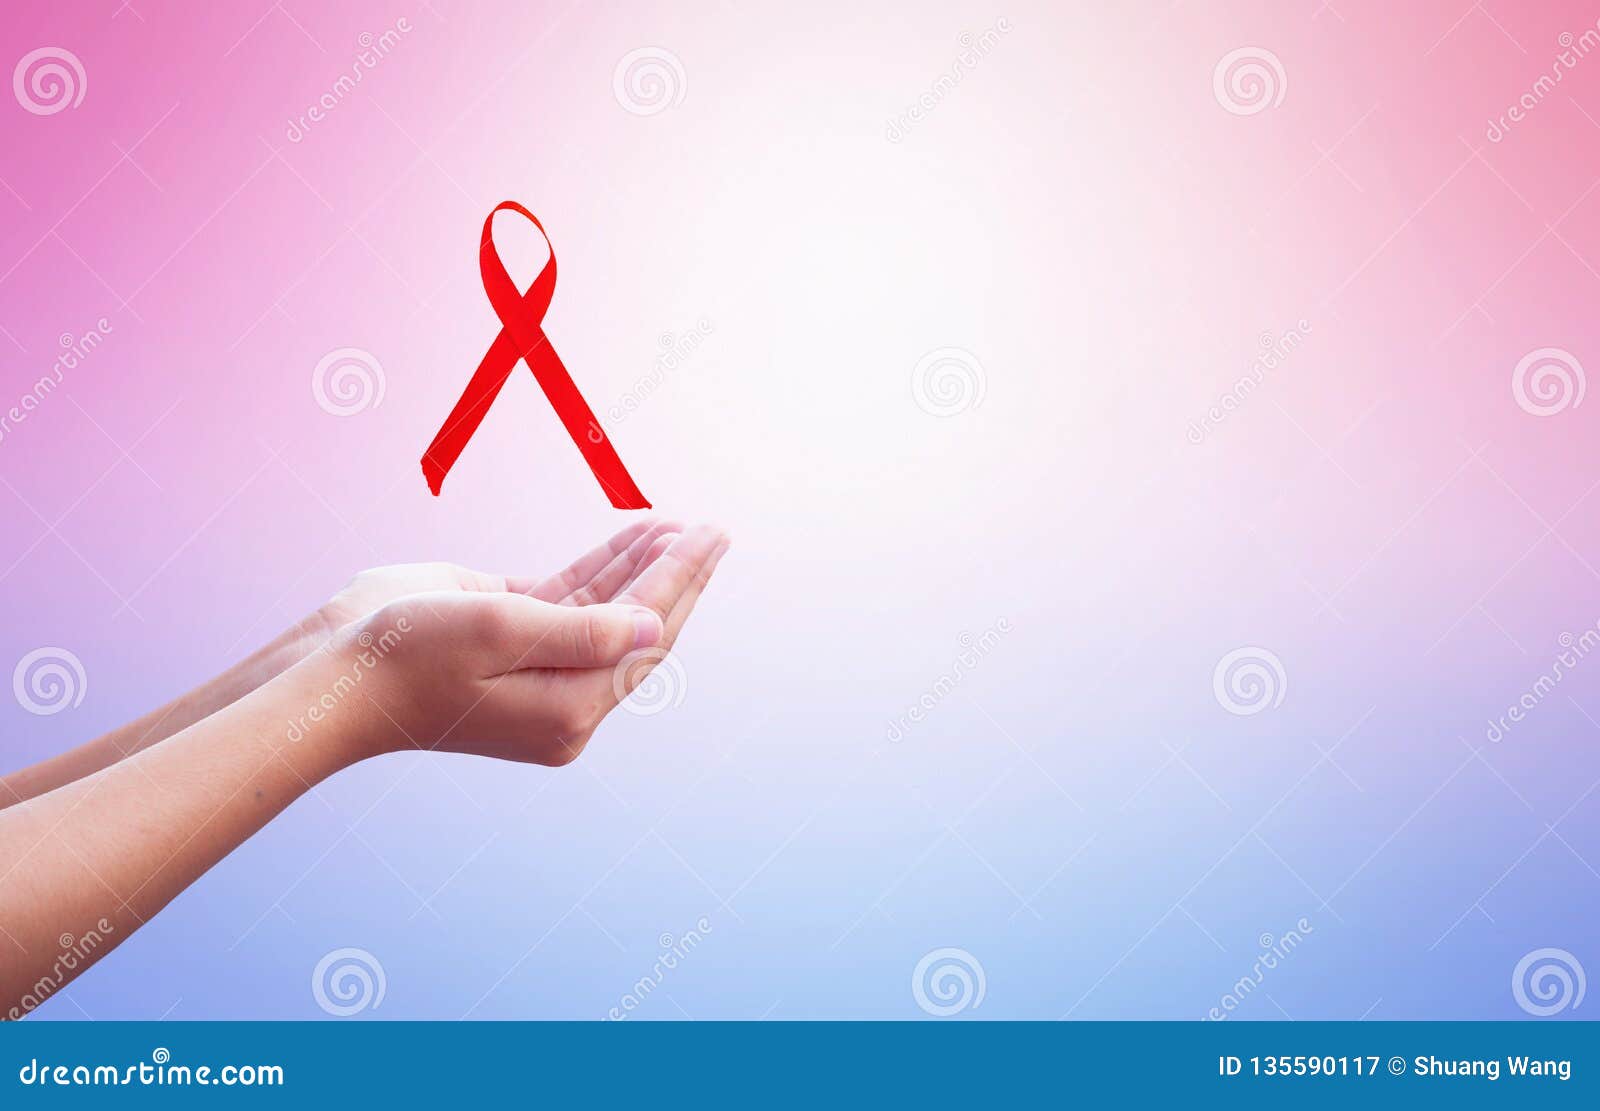 World Cancer Day Concept Cancer Day Ribbon Stock Image Image Of Concept Autism